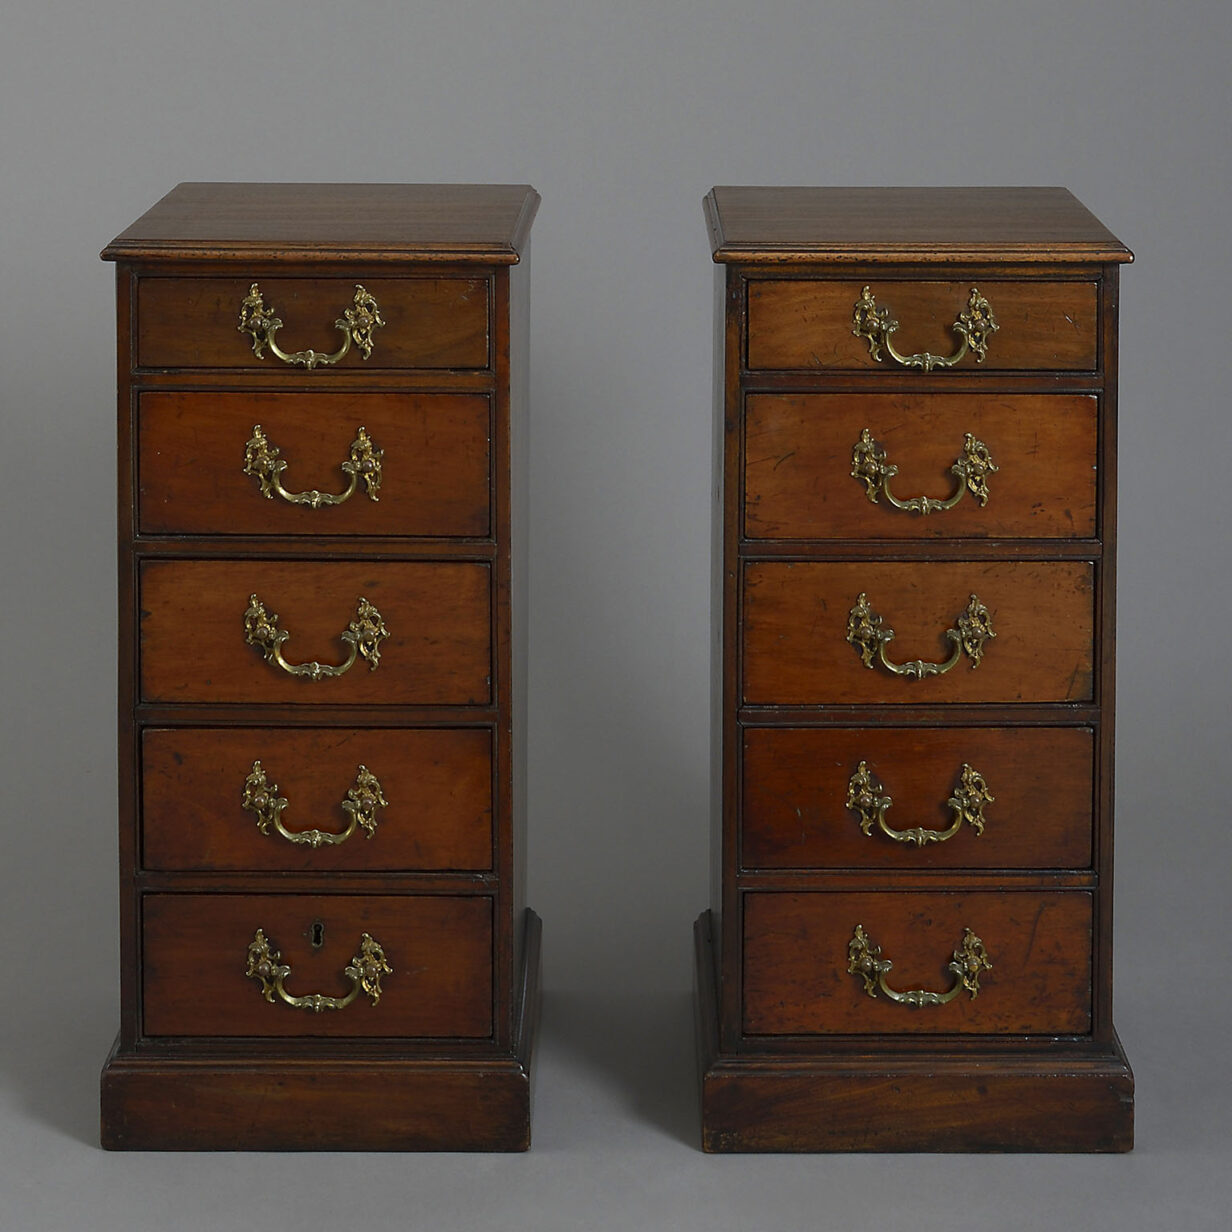 Pair of Mahogany Chests of Drawers